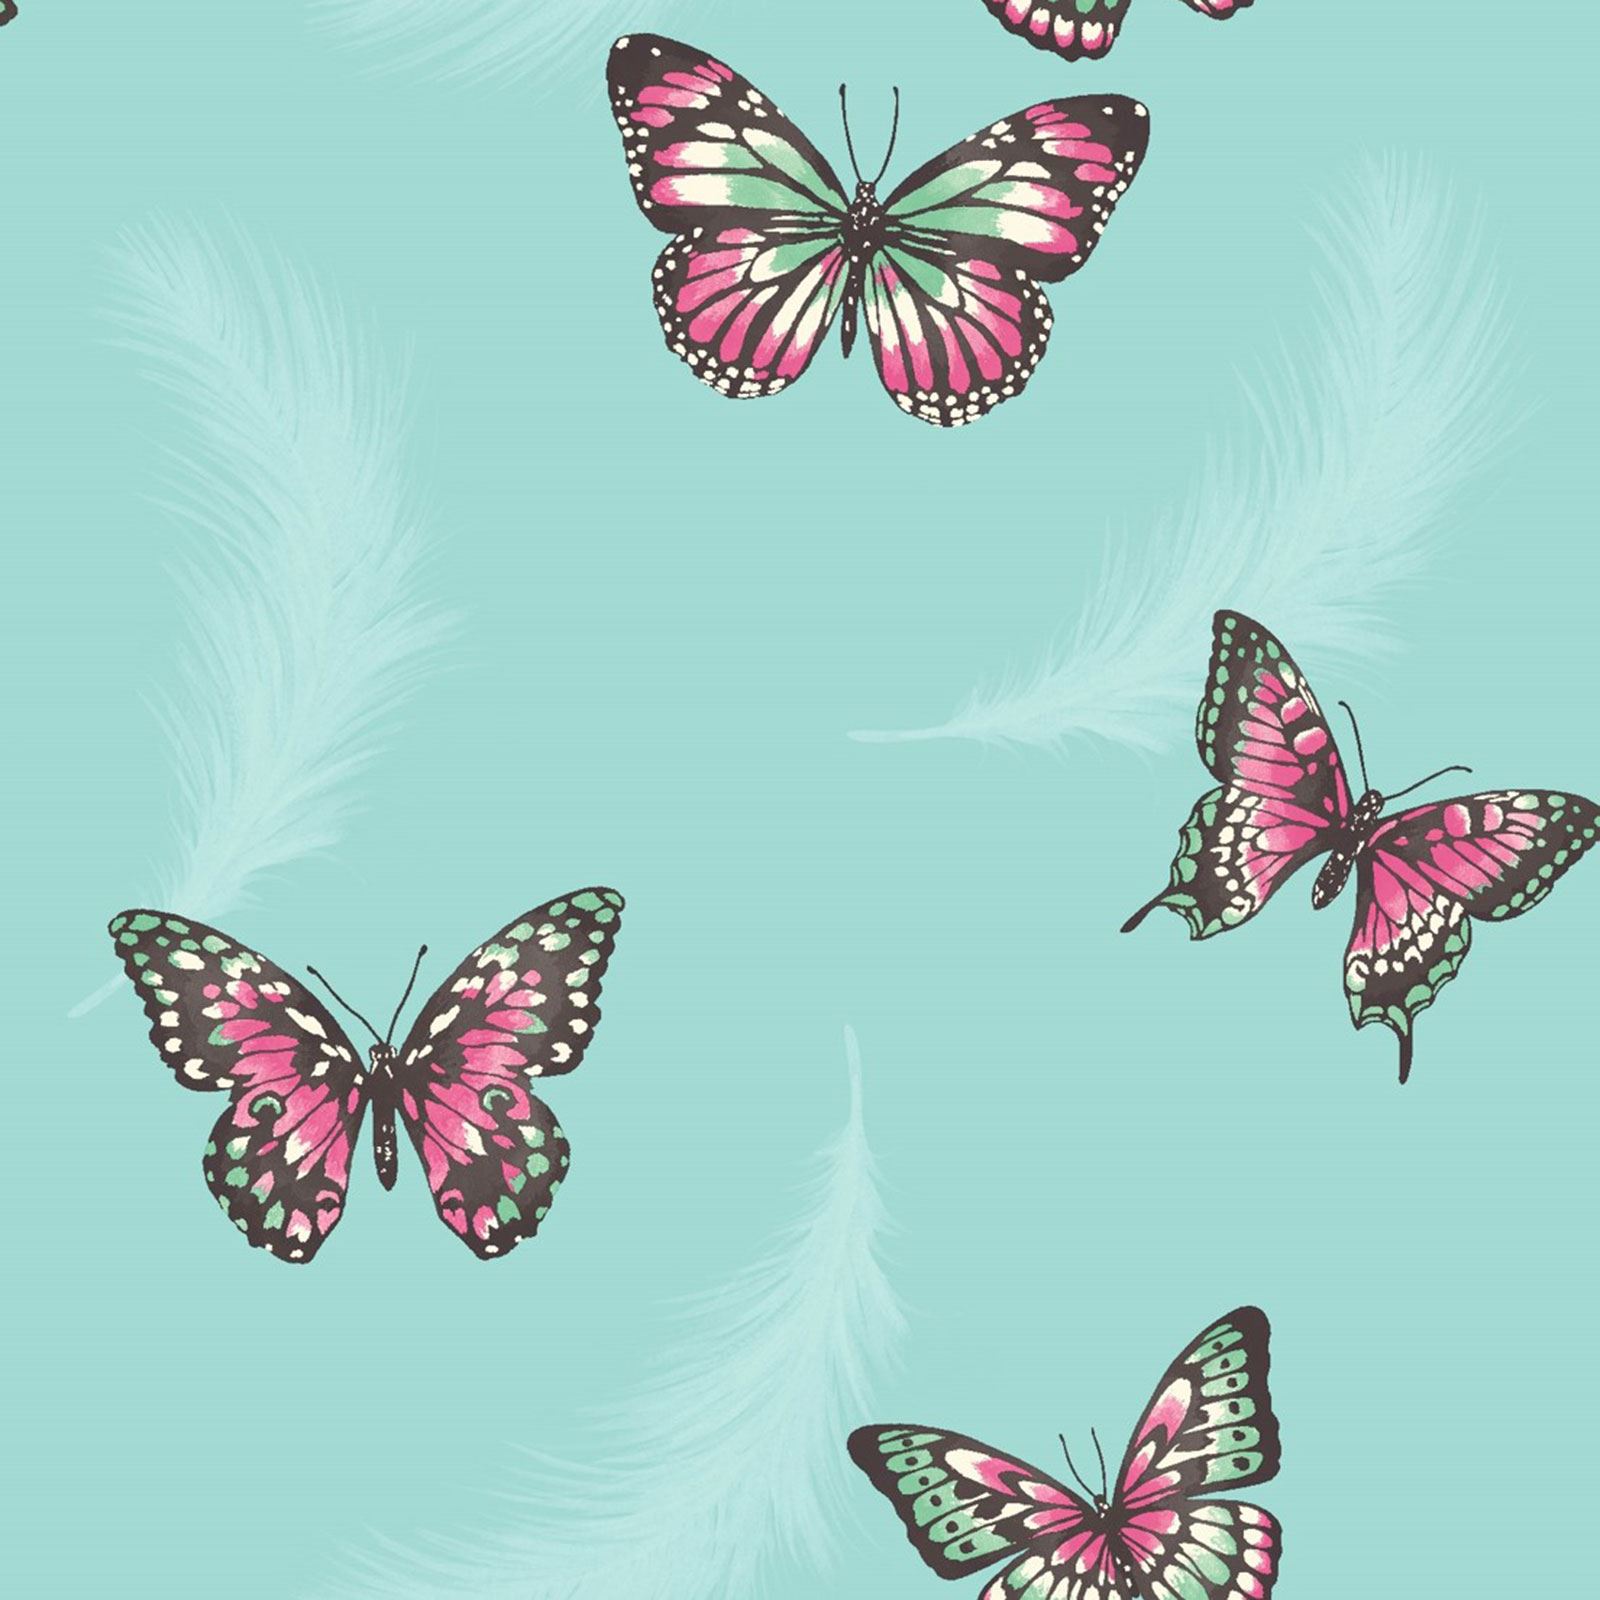 GIRLS BEDROOM BUTTERFLY WALLPAPER IN PINK, WHITE, TEAL + MORE! NEW ...